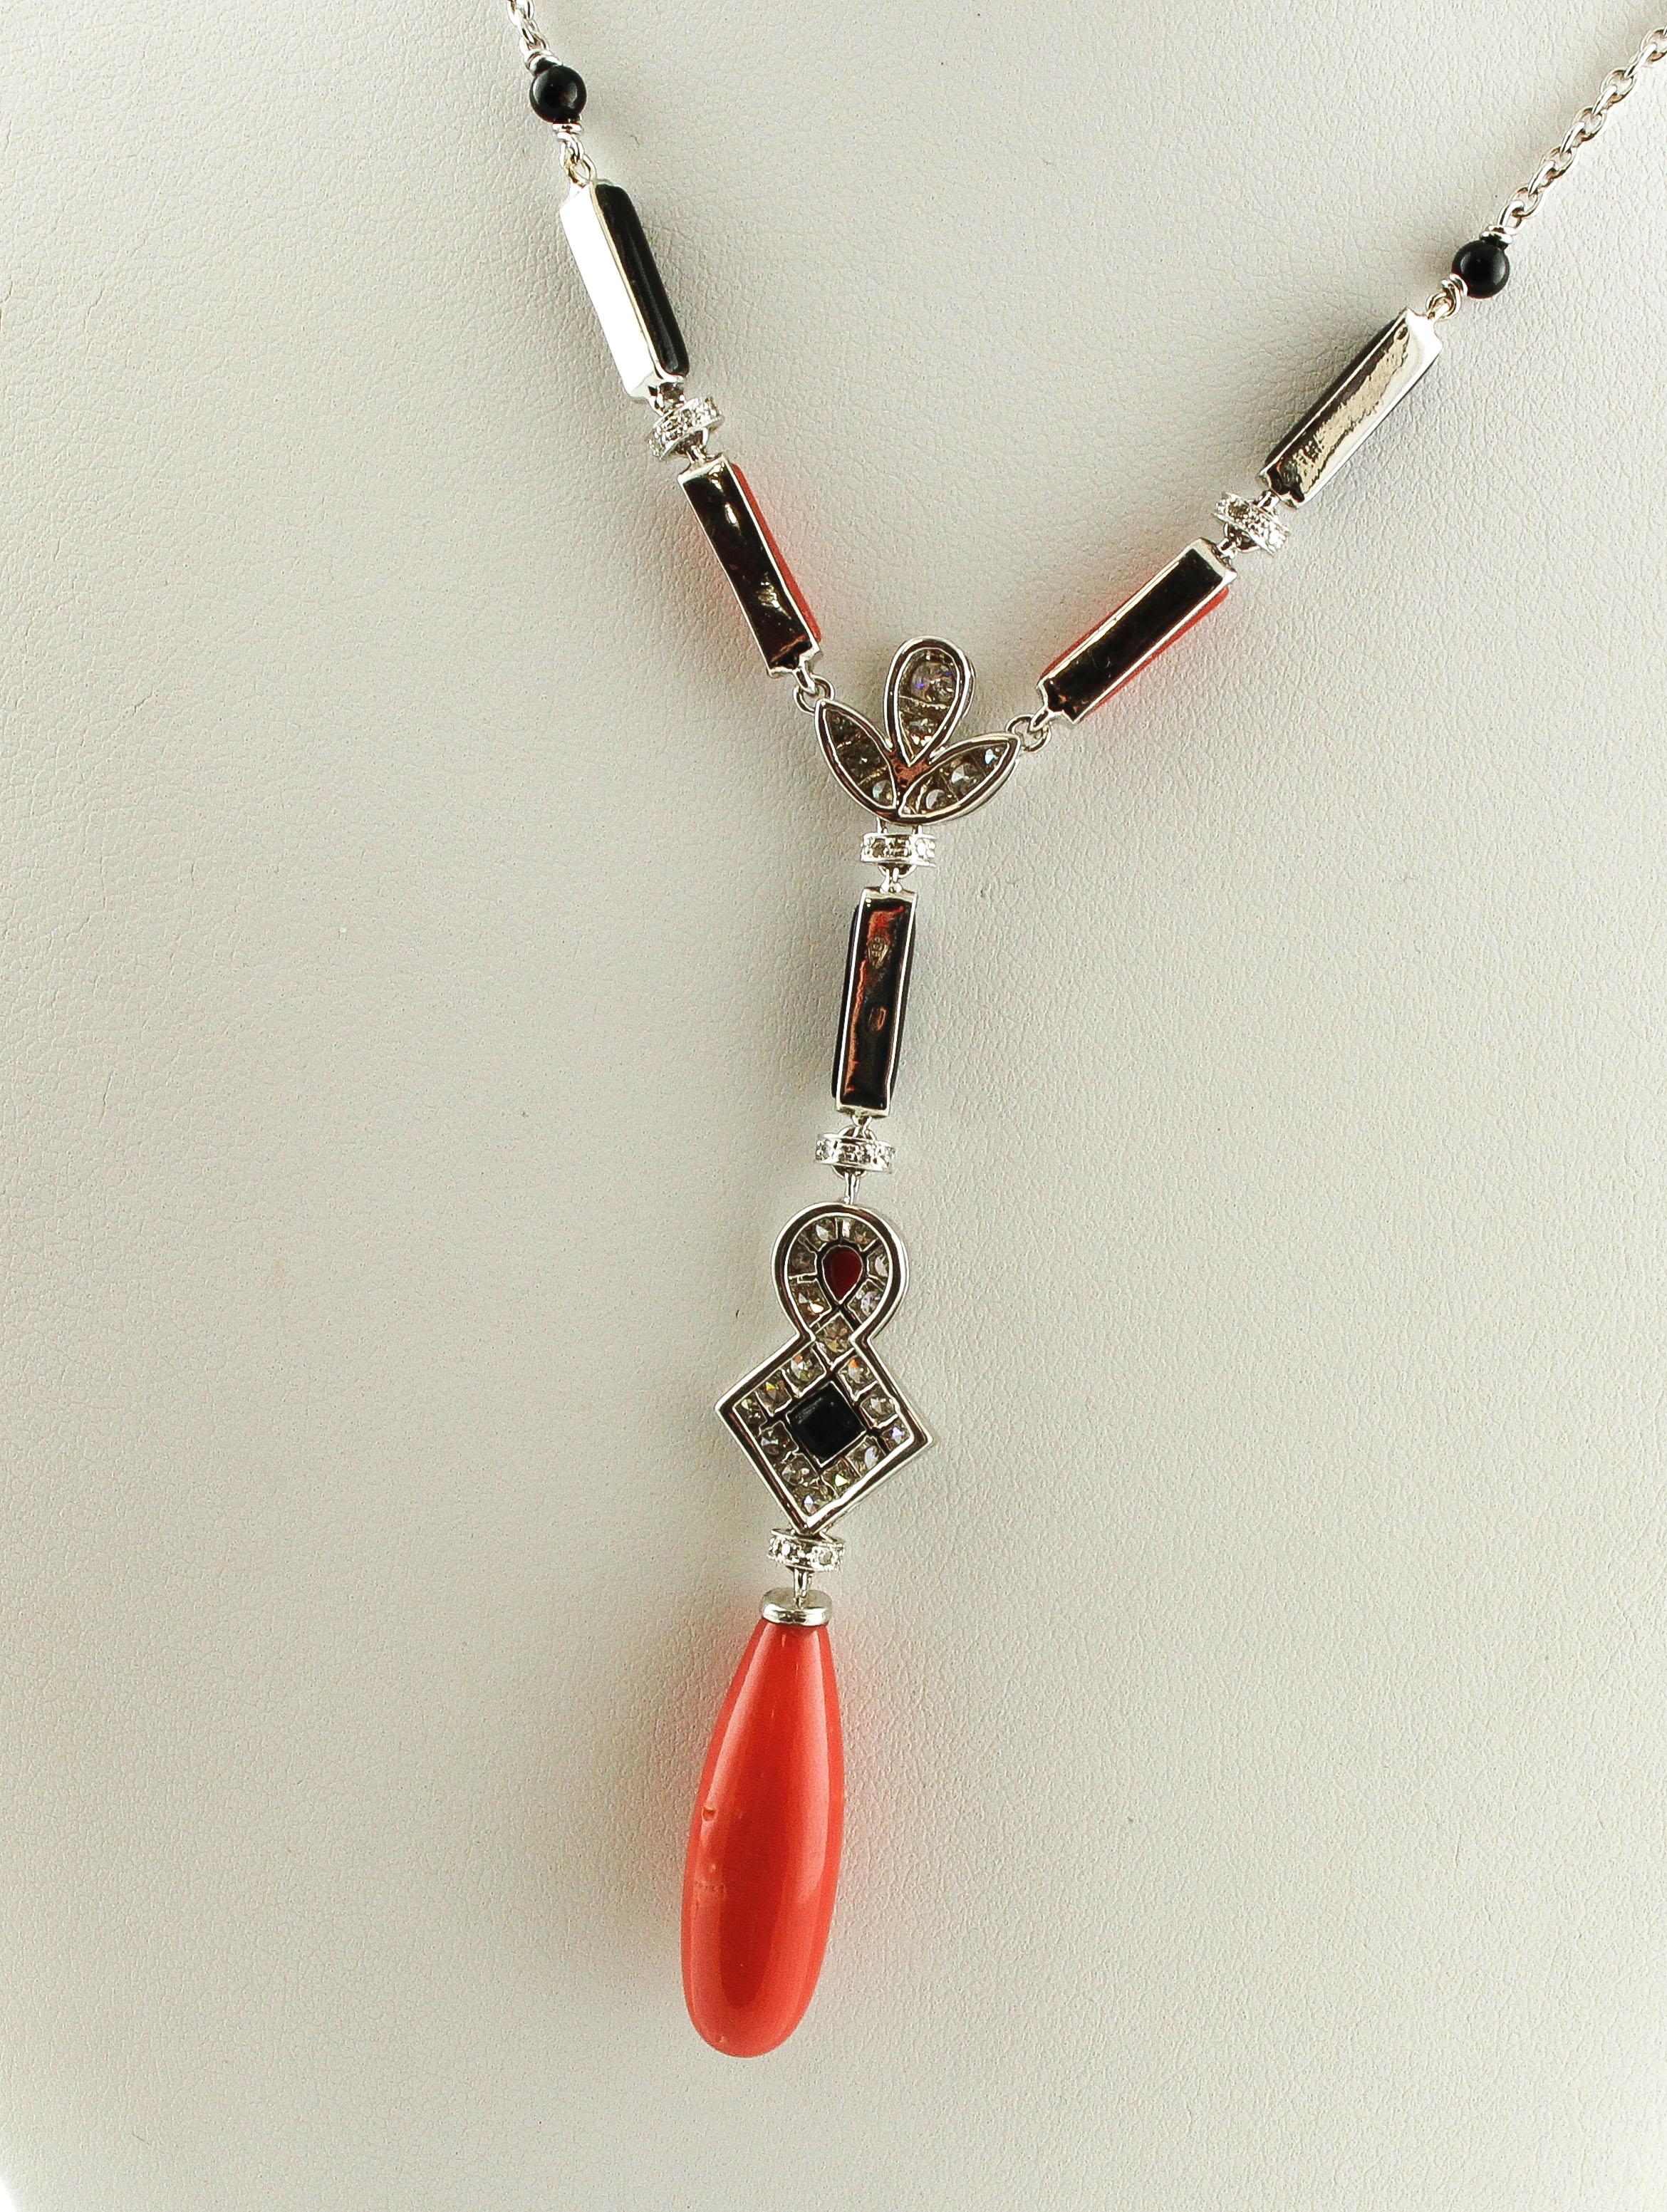 For any problems related to some materials contained in the items that do not allow shipping and require specific documents that require from six to eight weeks to obtain, please Unique and elegant fashion pendant necklace, composed of red rubrum